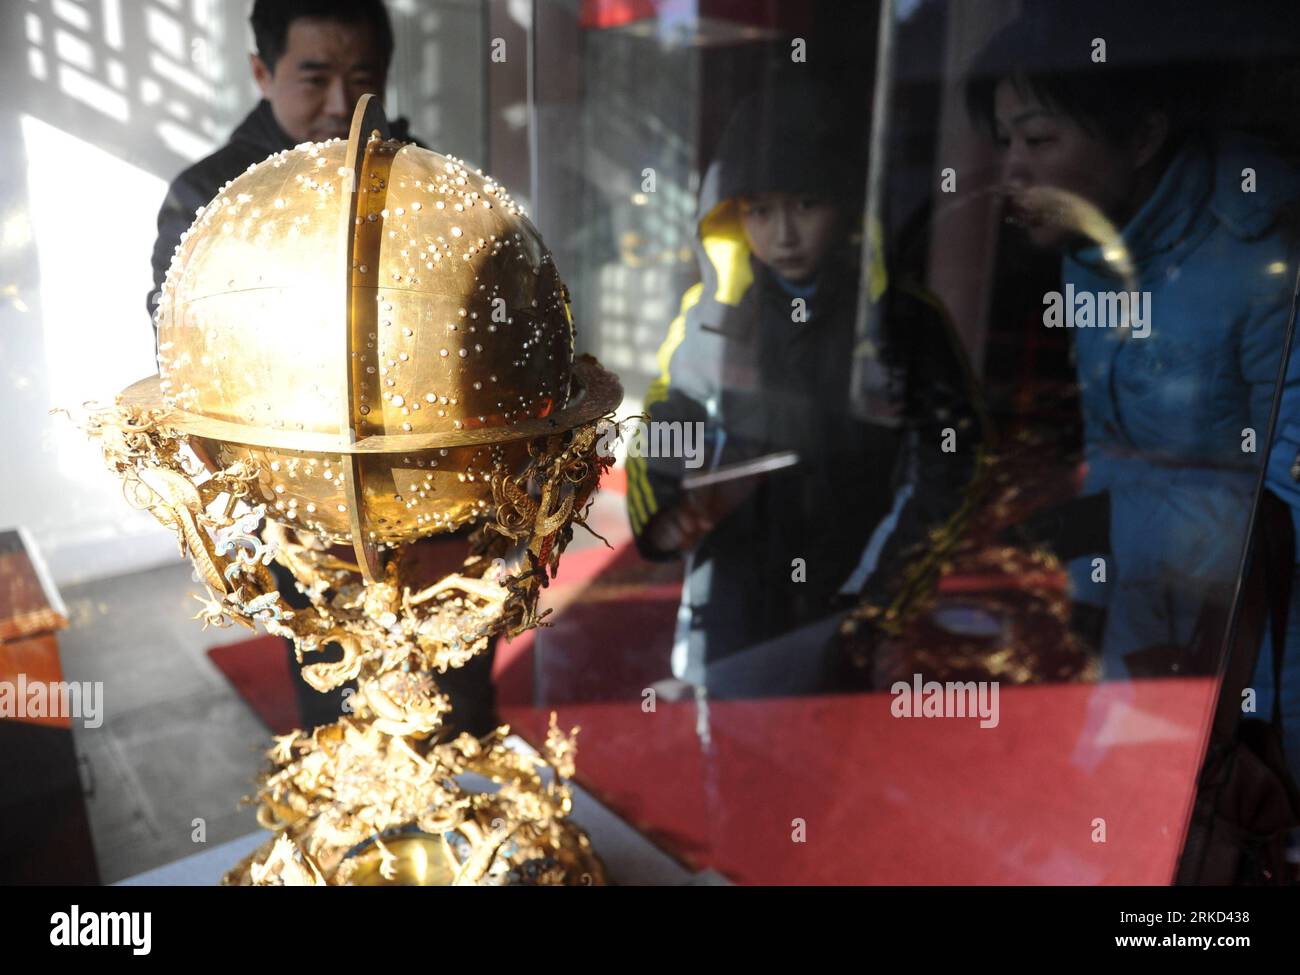 Bildnummer: 54858094  Datum: 26.01.2011  Copyright: imago/Xinhua (110127) -- BEIJING, Jan. 27, 2011 (Xinhua) -- Tourists view a gold celestial globe in China s Palace Museum in Beijing, capital of China, Jan. 26, 2011. China s Palace Museum, located inside the Forbidden City, announced on Wednesday that a seven-year inventory, which began in 2004, reveals the museum s collection includes 1,807,558 objects, providing the first accurate appraisal of the size of the museum s collection. (Xinhua/Jin Liangkuai) (ly) CHINA-BEIJING-PALACE MUSEUM-COLLECTION-APPRAISAL (CN) PUBLICATIONxNOTxINxCHN Reisen Stock Photo